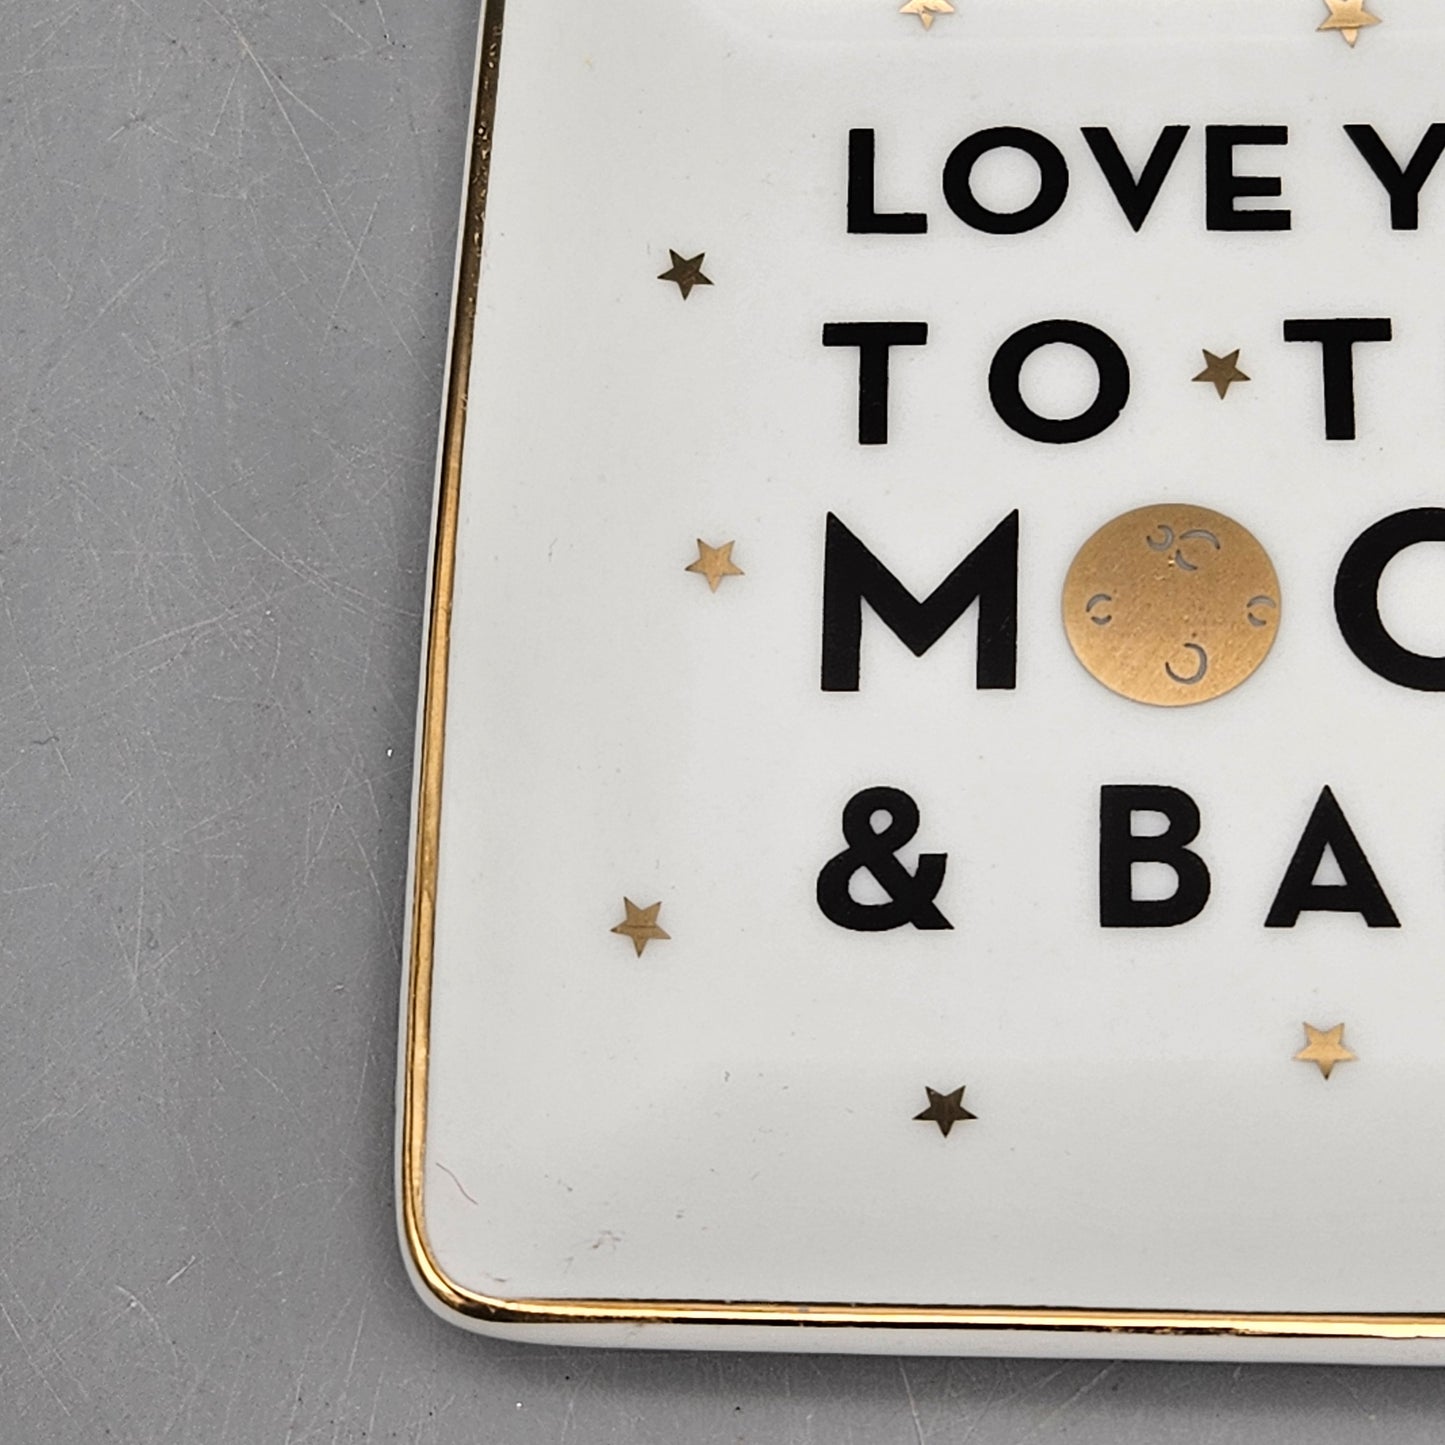 Paper Source "Love You to the Moon and Back" Porcelain Tray